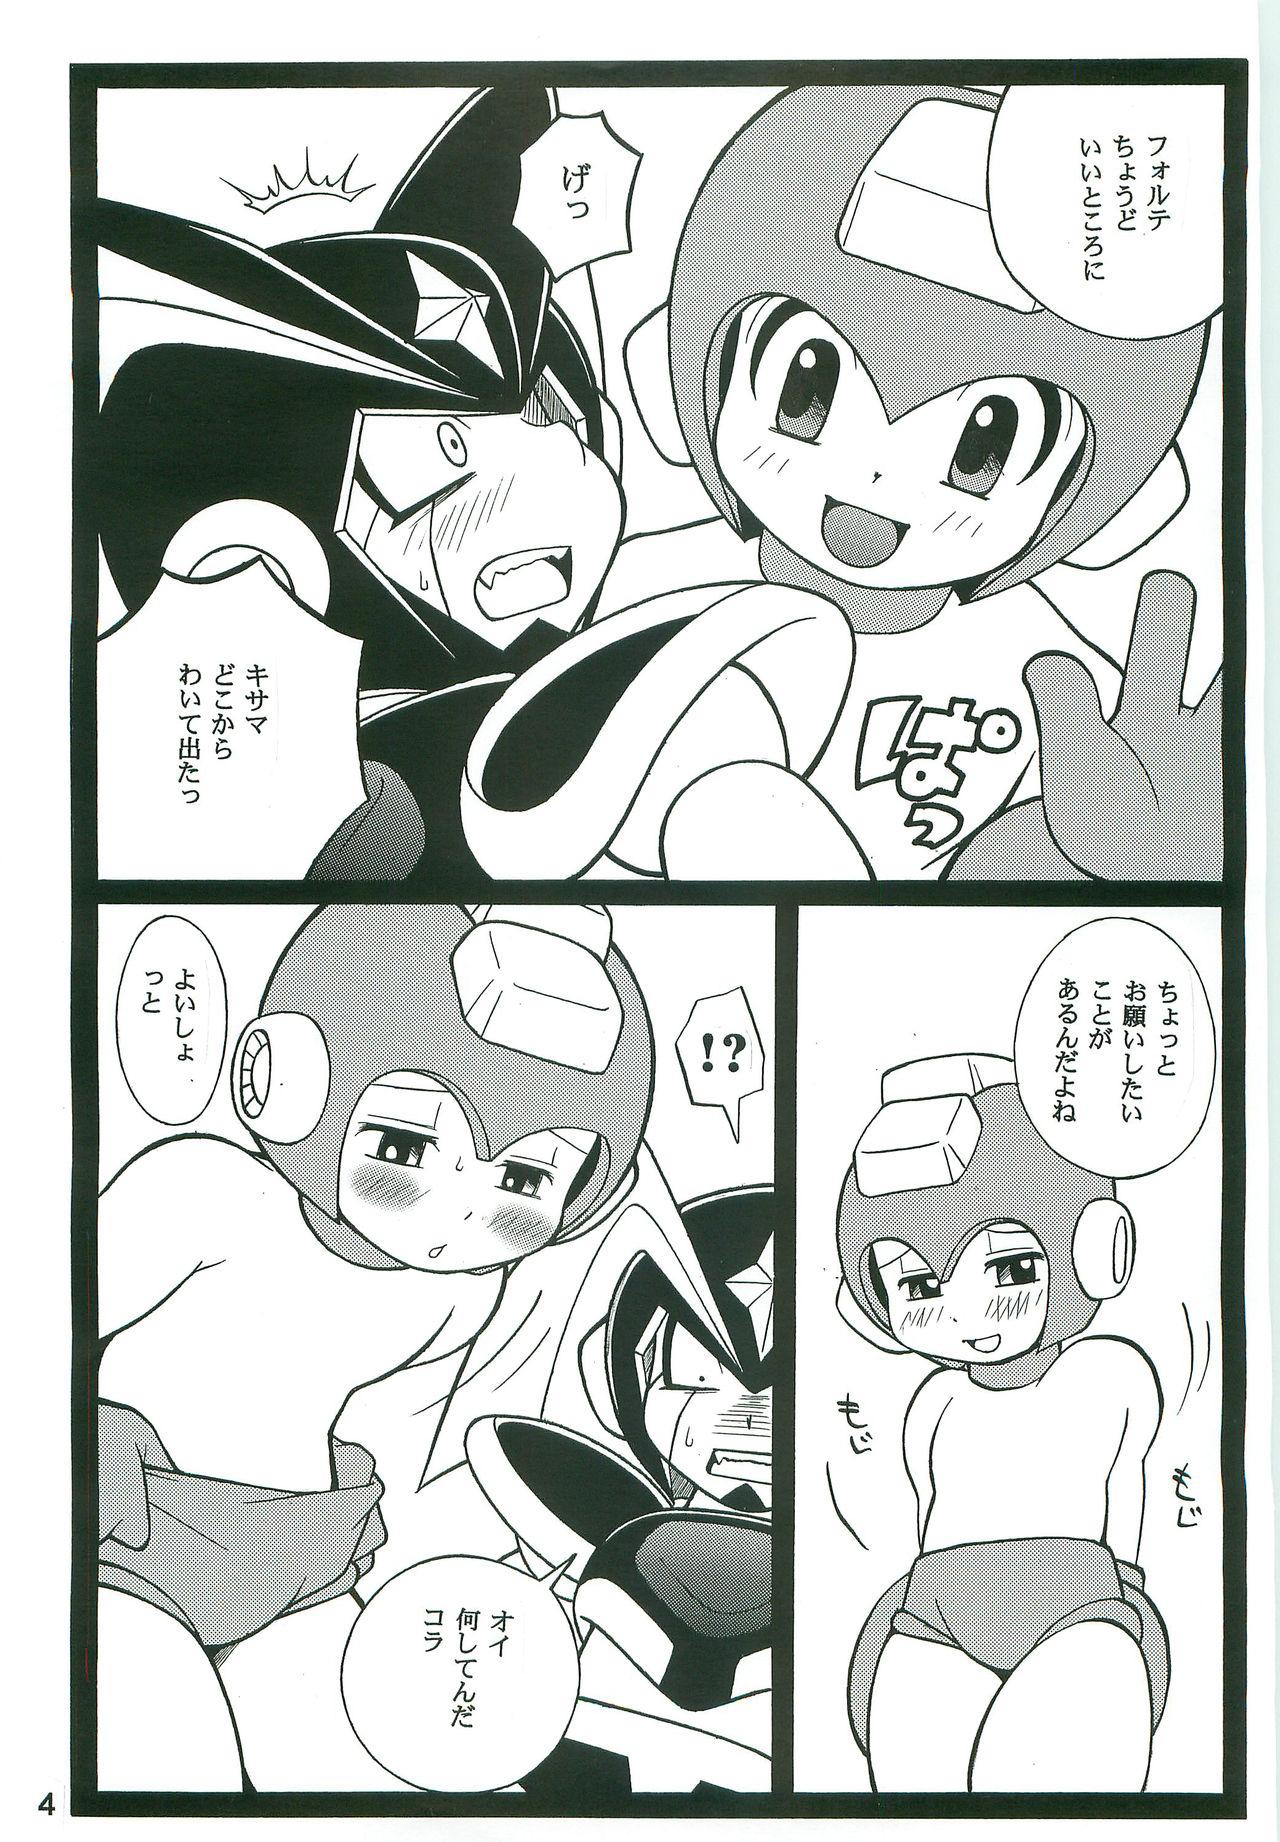 Anal Play DREAM OF BASS - Megaman Muscles - Page 3